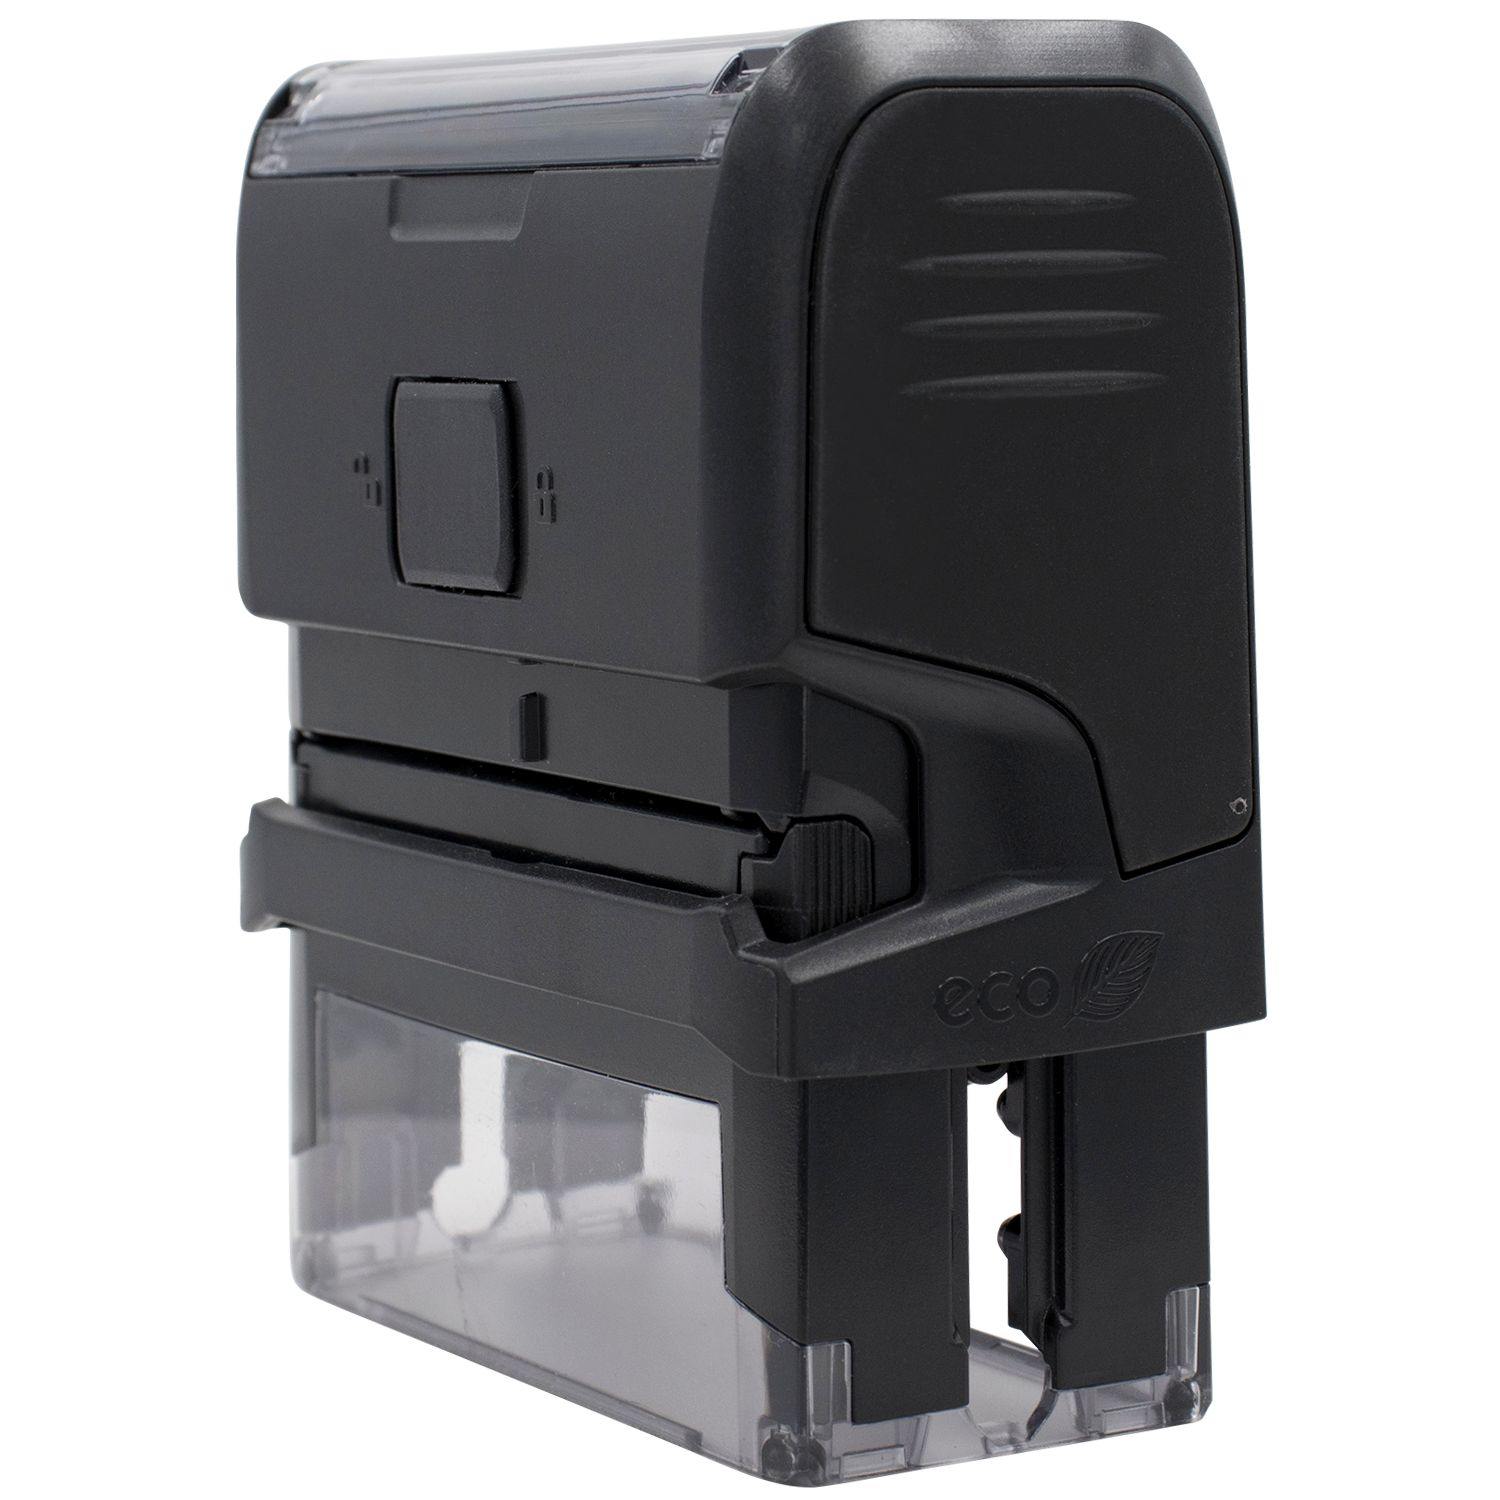 Side View of Large Self-Inking Cargado Stamp at an Angle